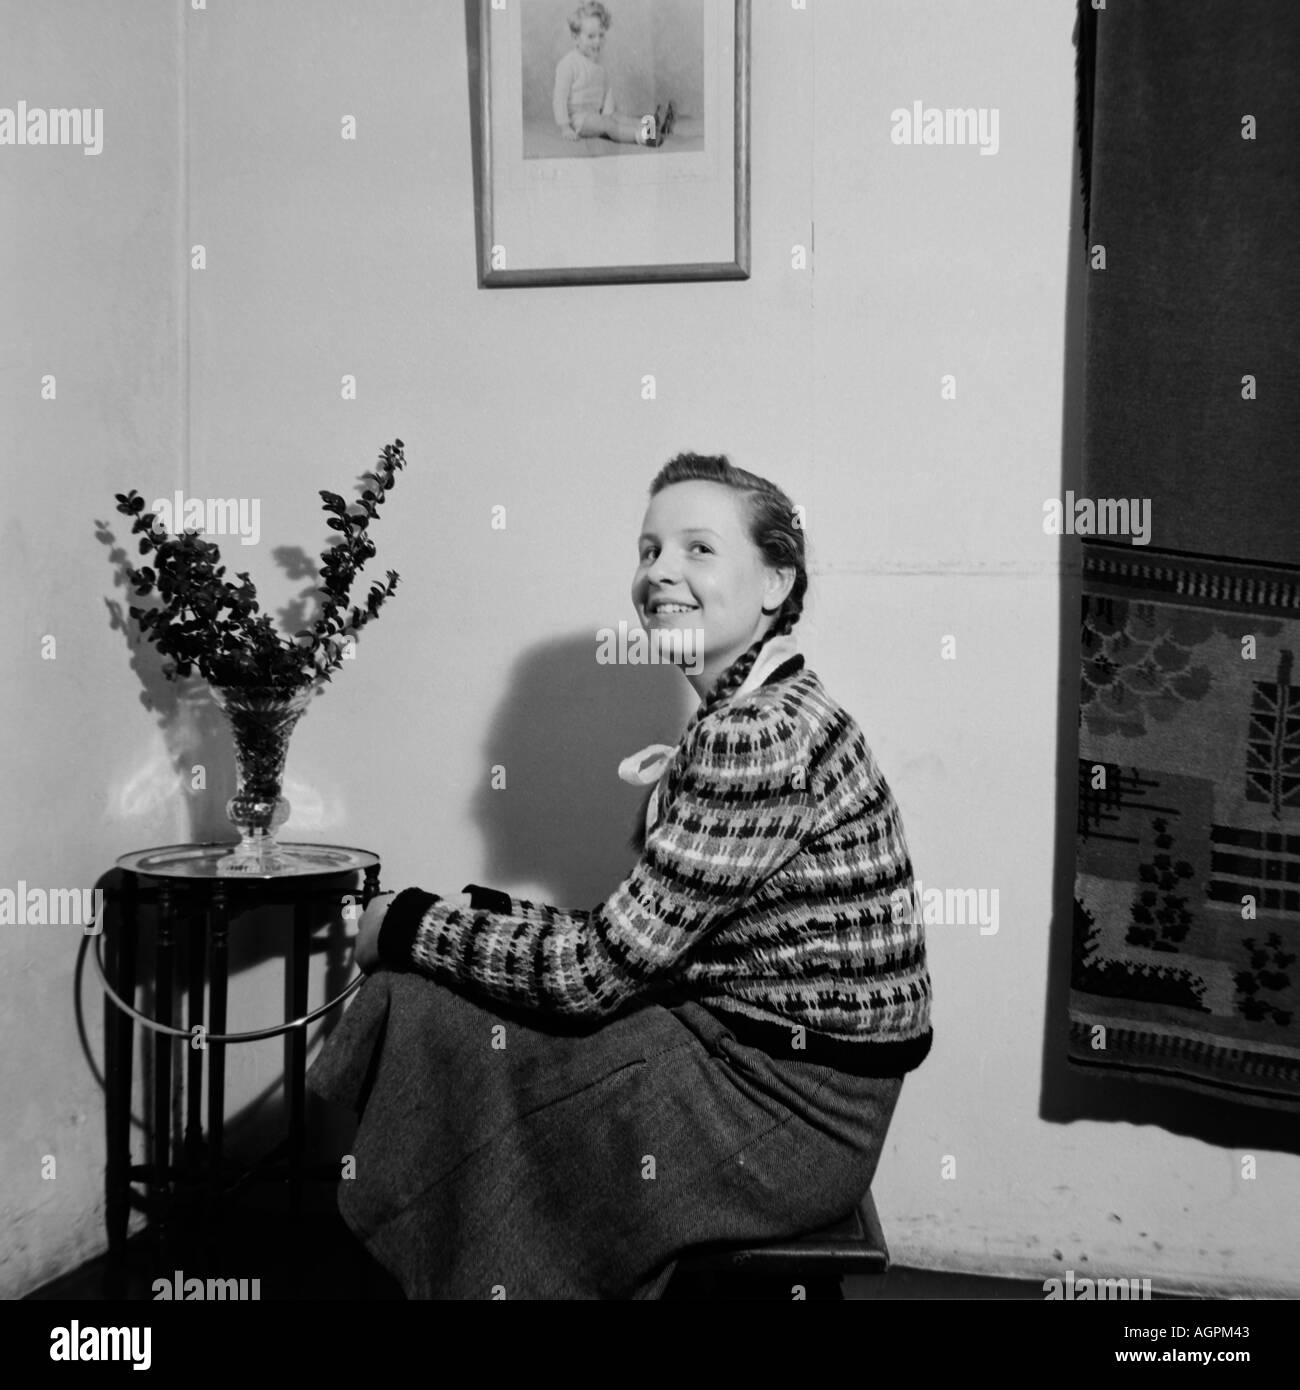 OLD VINTAGE FAMILY PHOTOGRAPH SNAP SHOT GIRL SITTING ON STOOL NEXT TO TABLE WITH VASE OF FLOWERS CIRCA 1950 Stock Photo